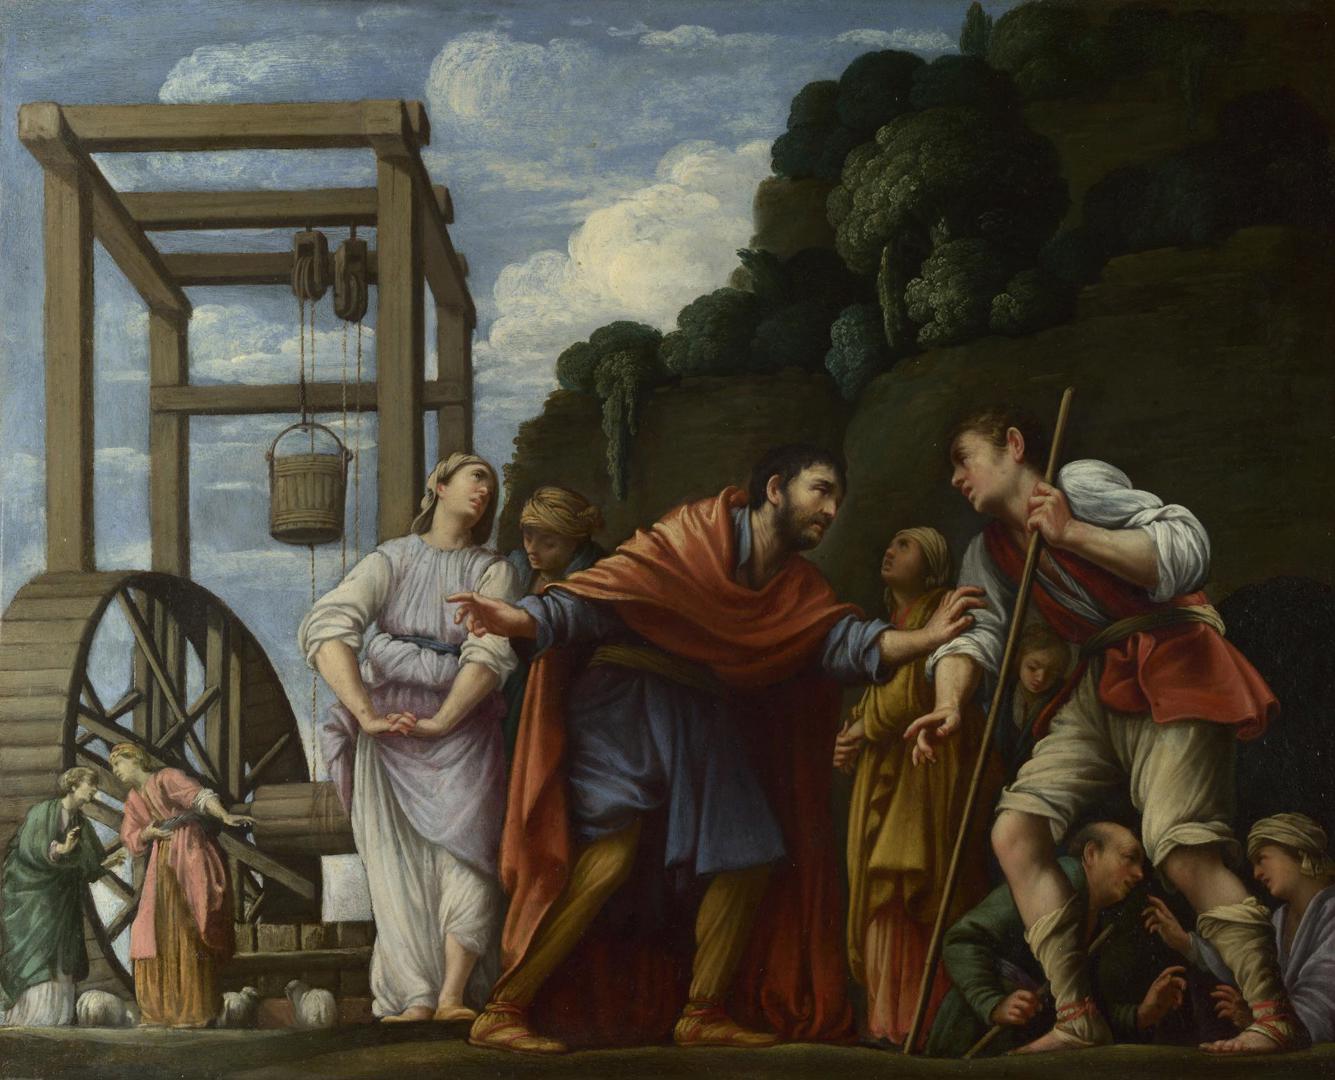 Moses defending the Daughters of Jethro by Carlo Saraceni